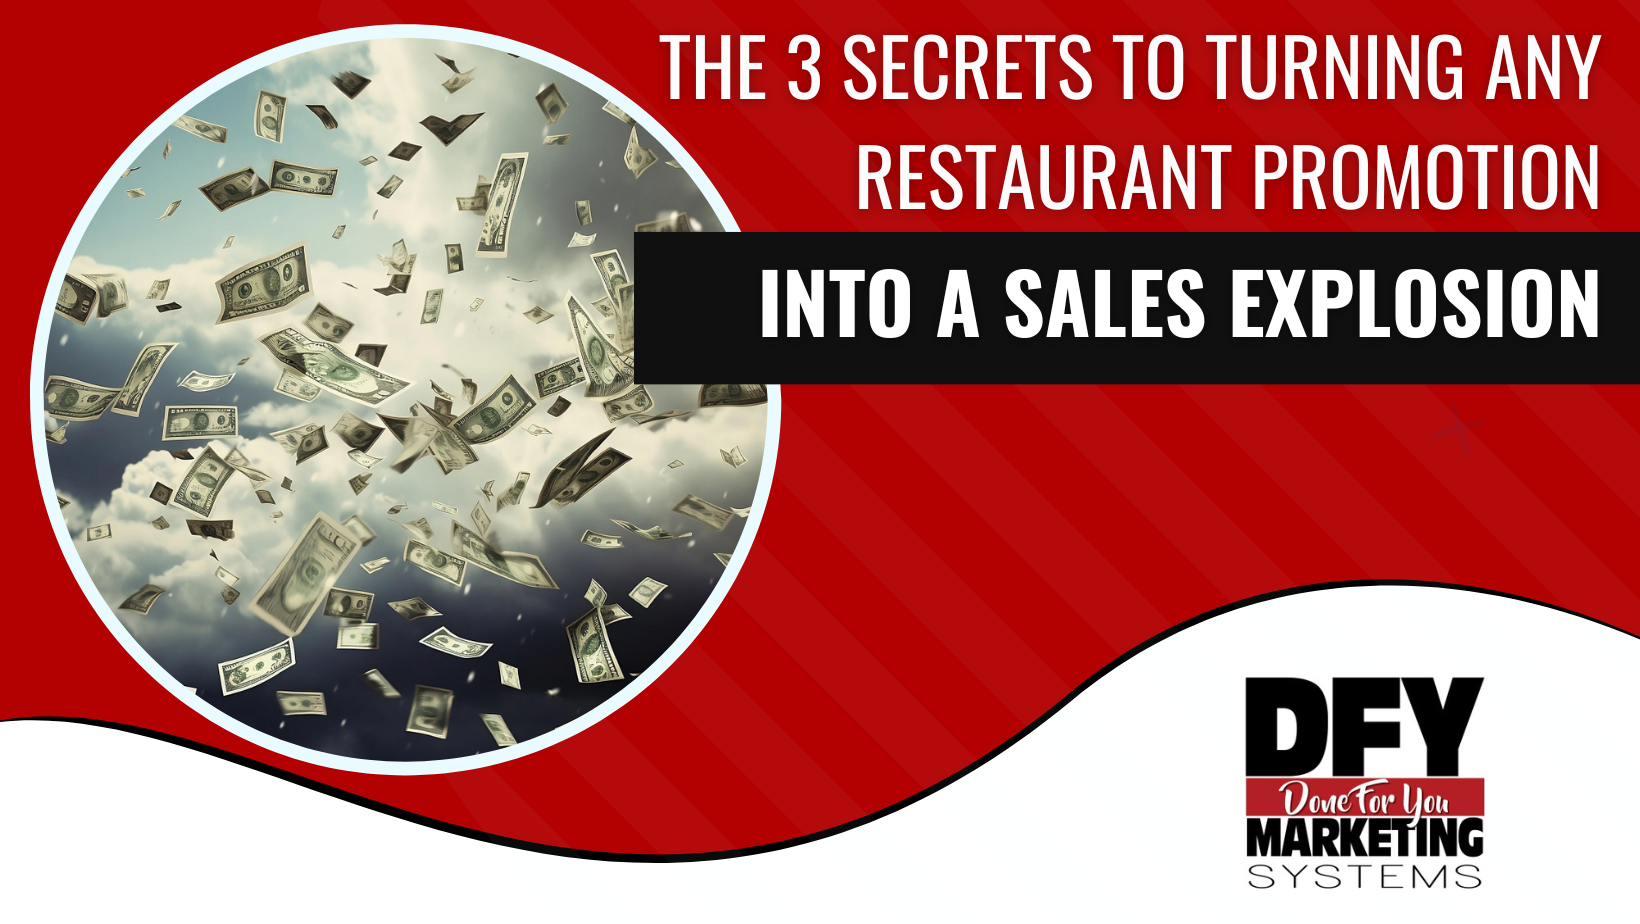 The 3 Secrets To Turning Any Restaurant Promotion Into A Sales Explosion